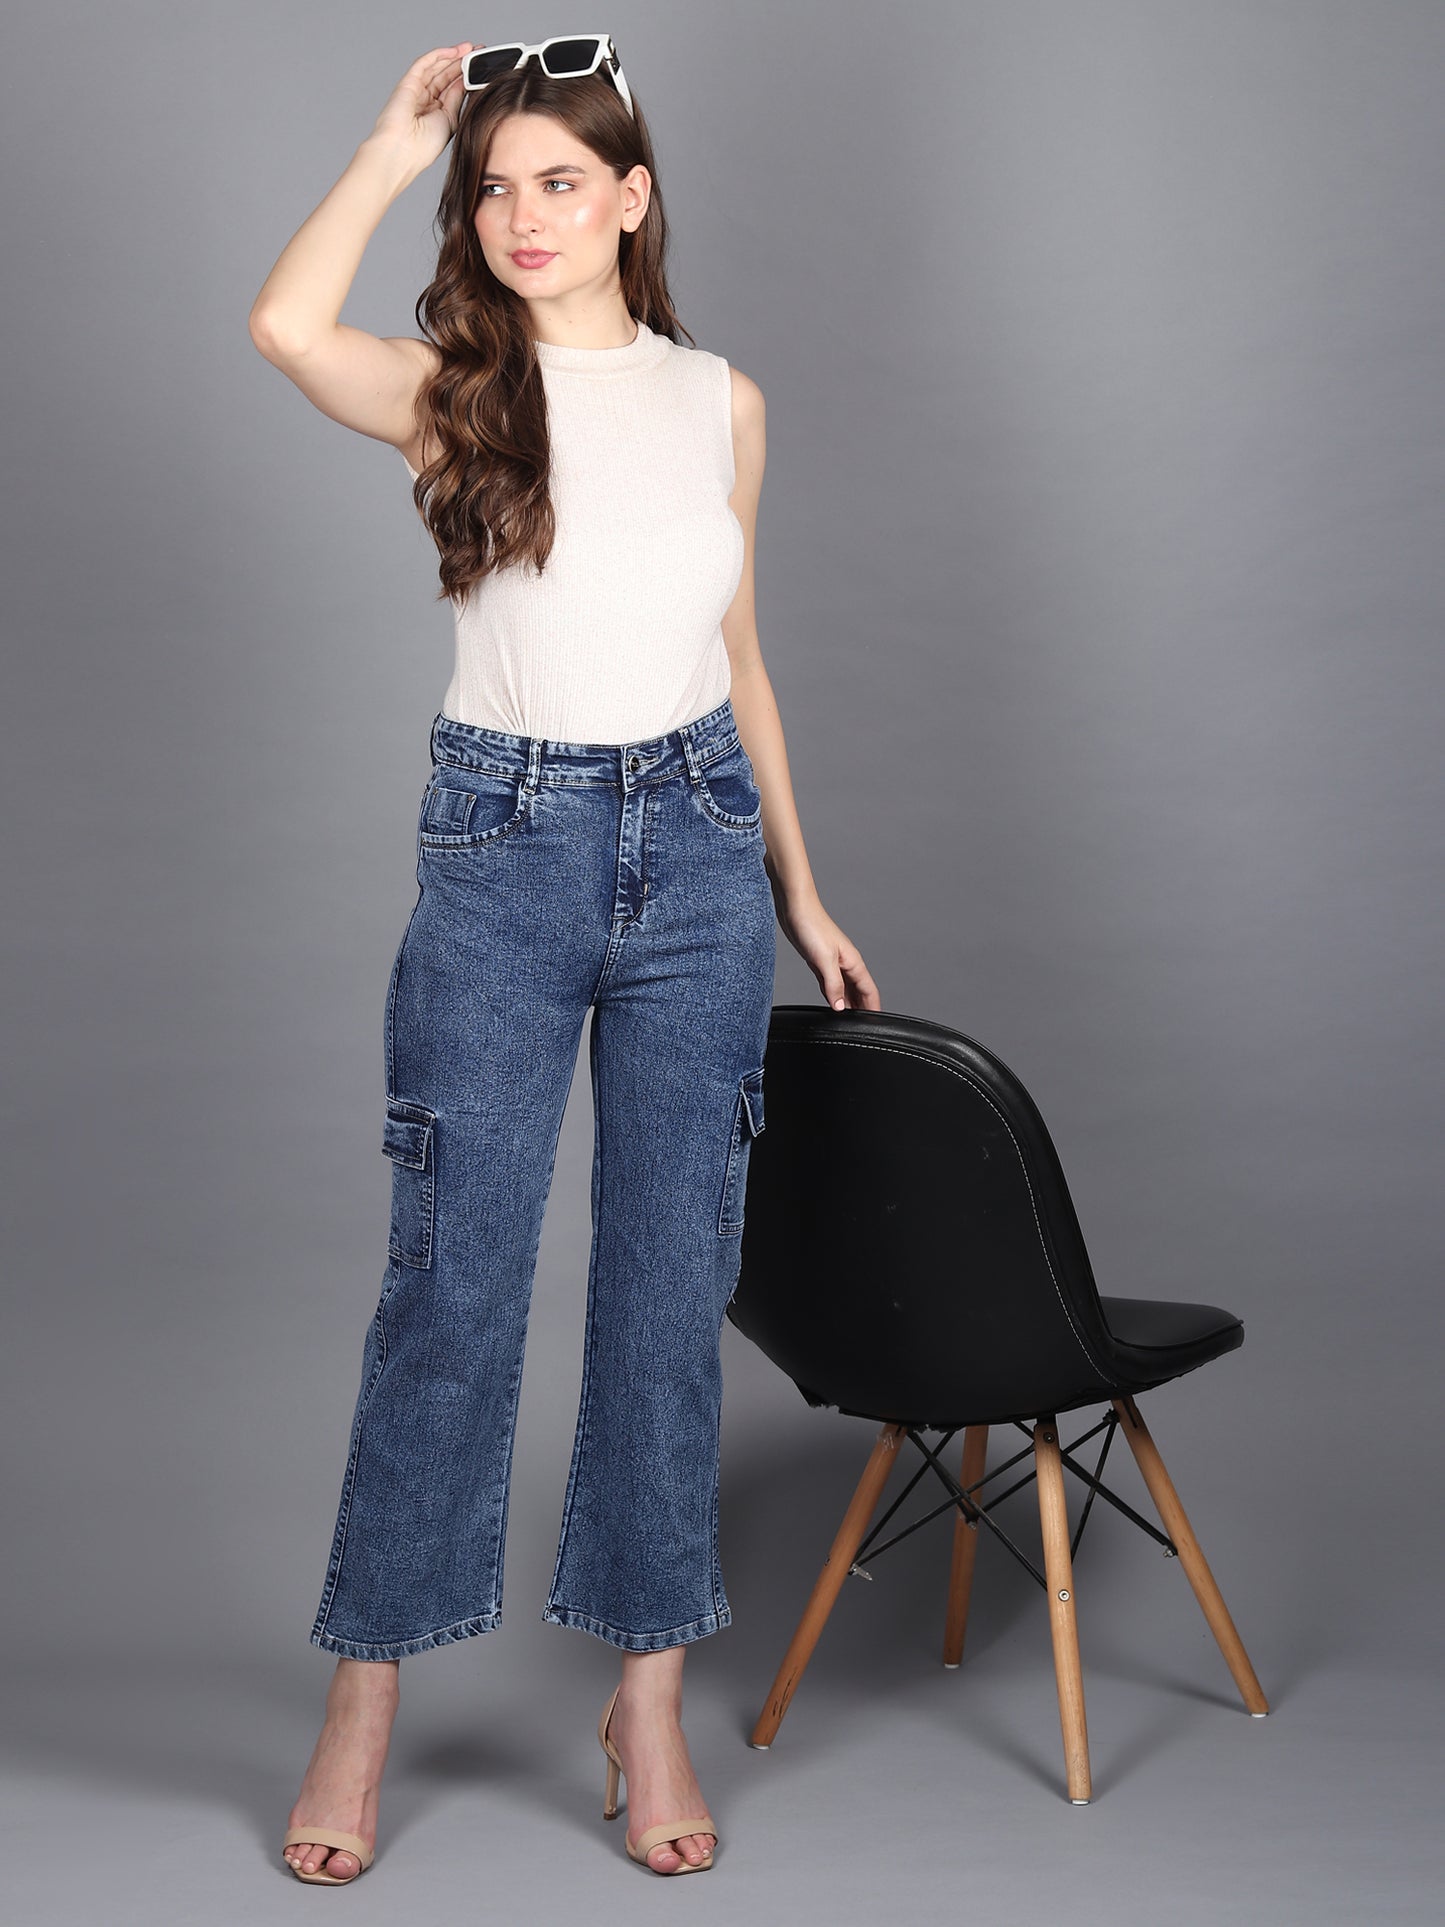 Blue Cargo Jeans For Women High Waist Straight Fit Stretchable Denim - 1214